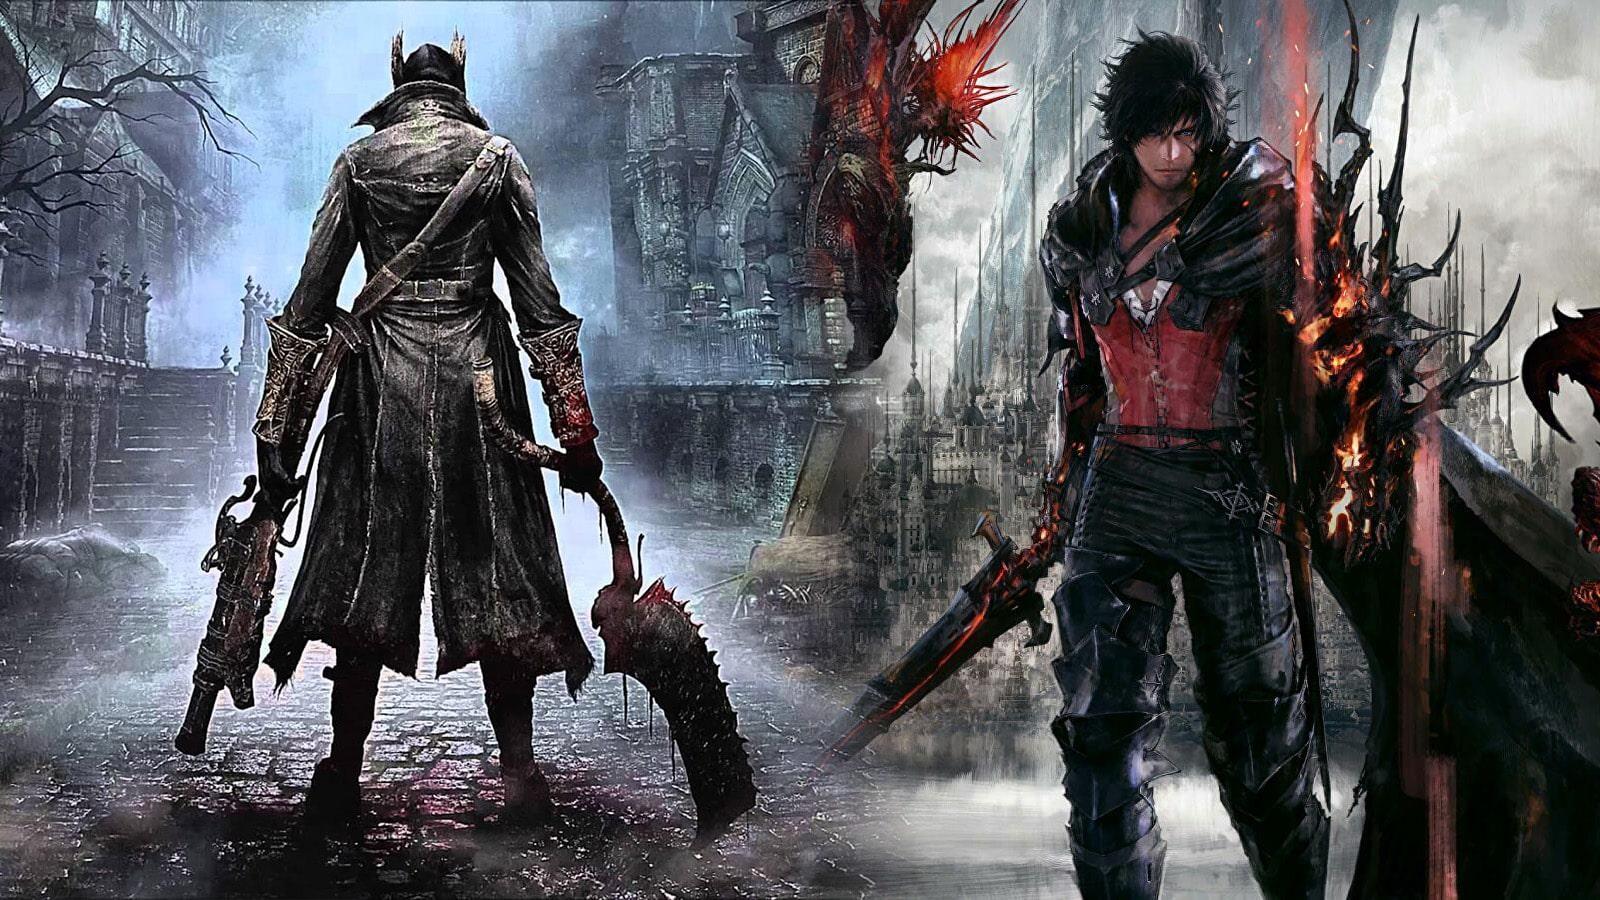 Bloodborne hunter with FF16 character